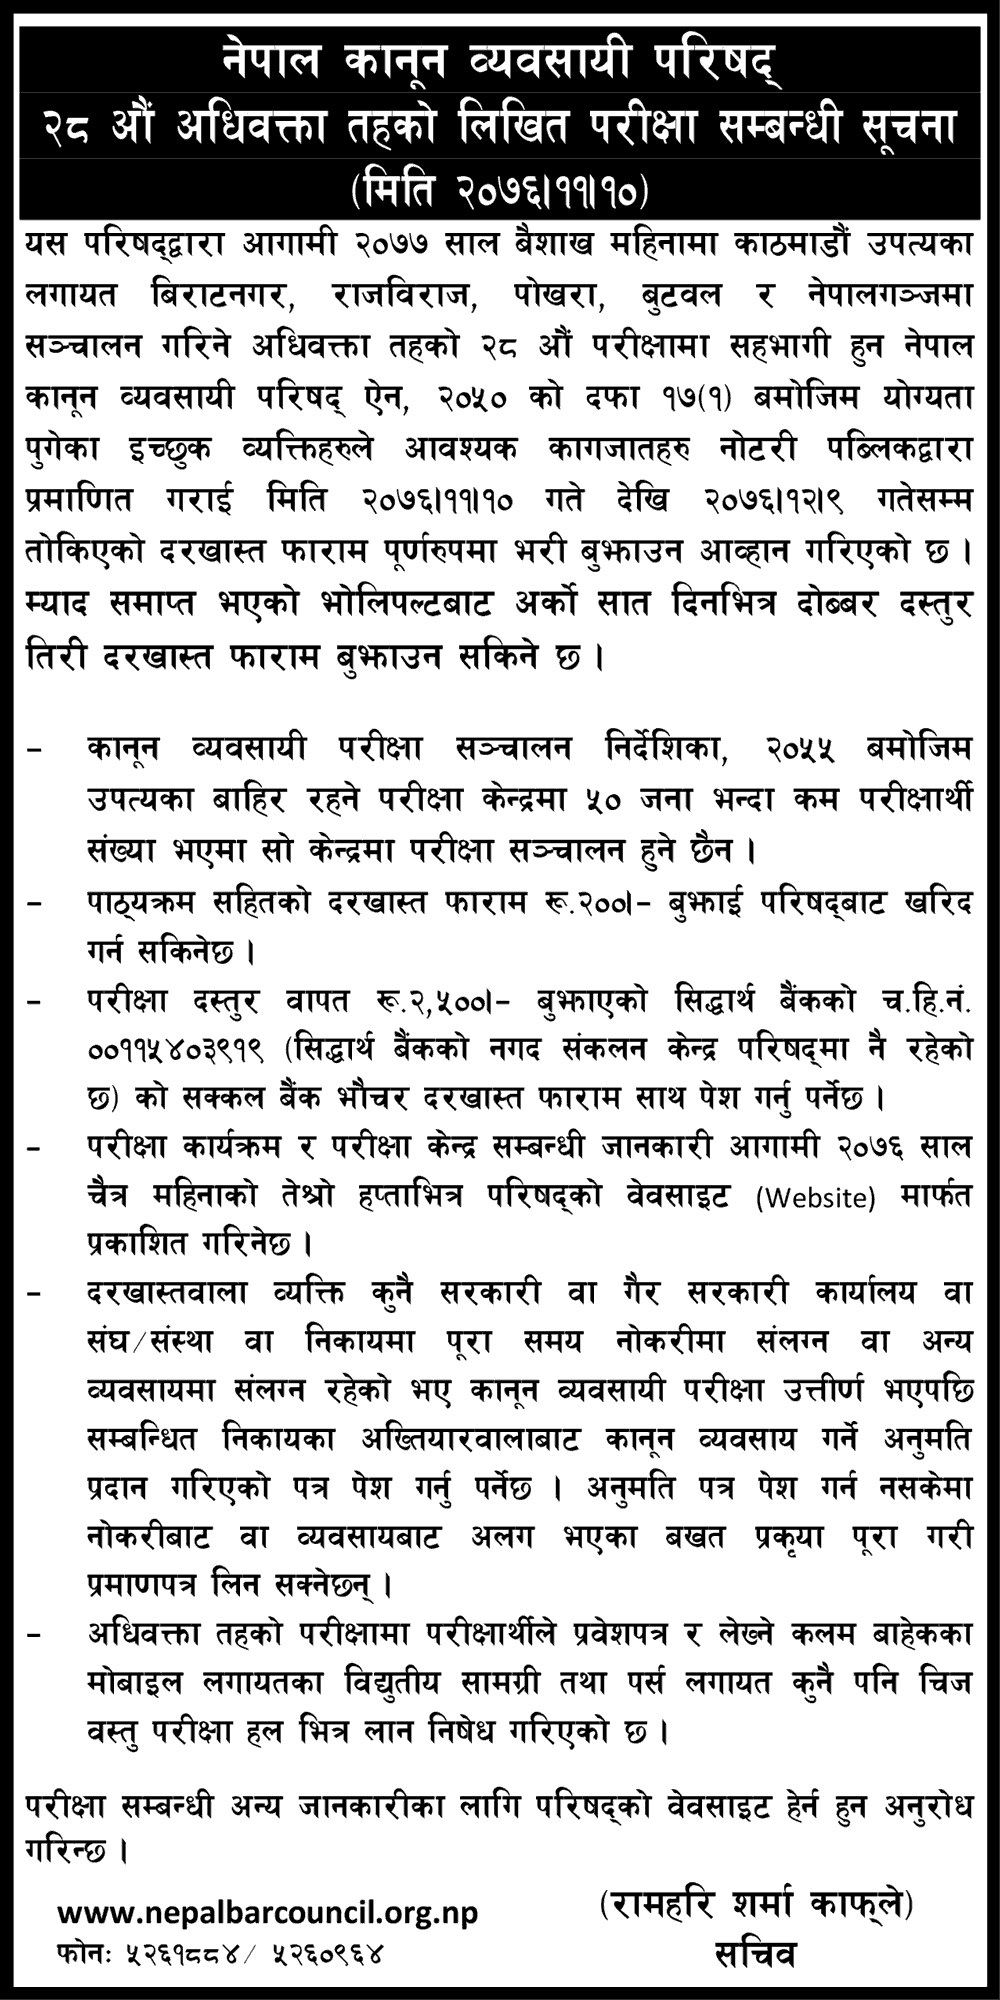 Nepal Bar Council Written Exam Result of Advocate level 28th